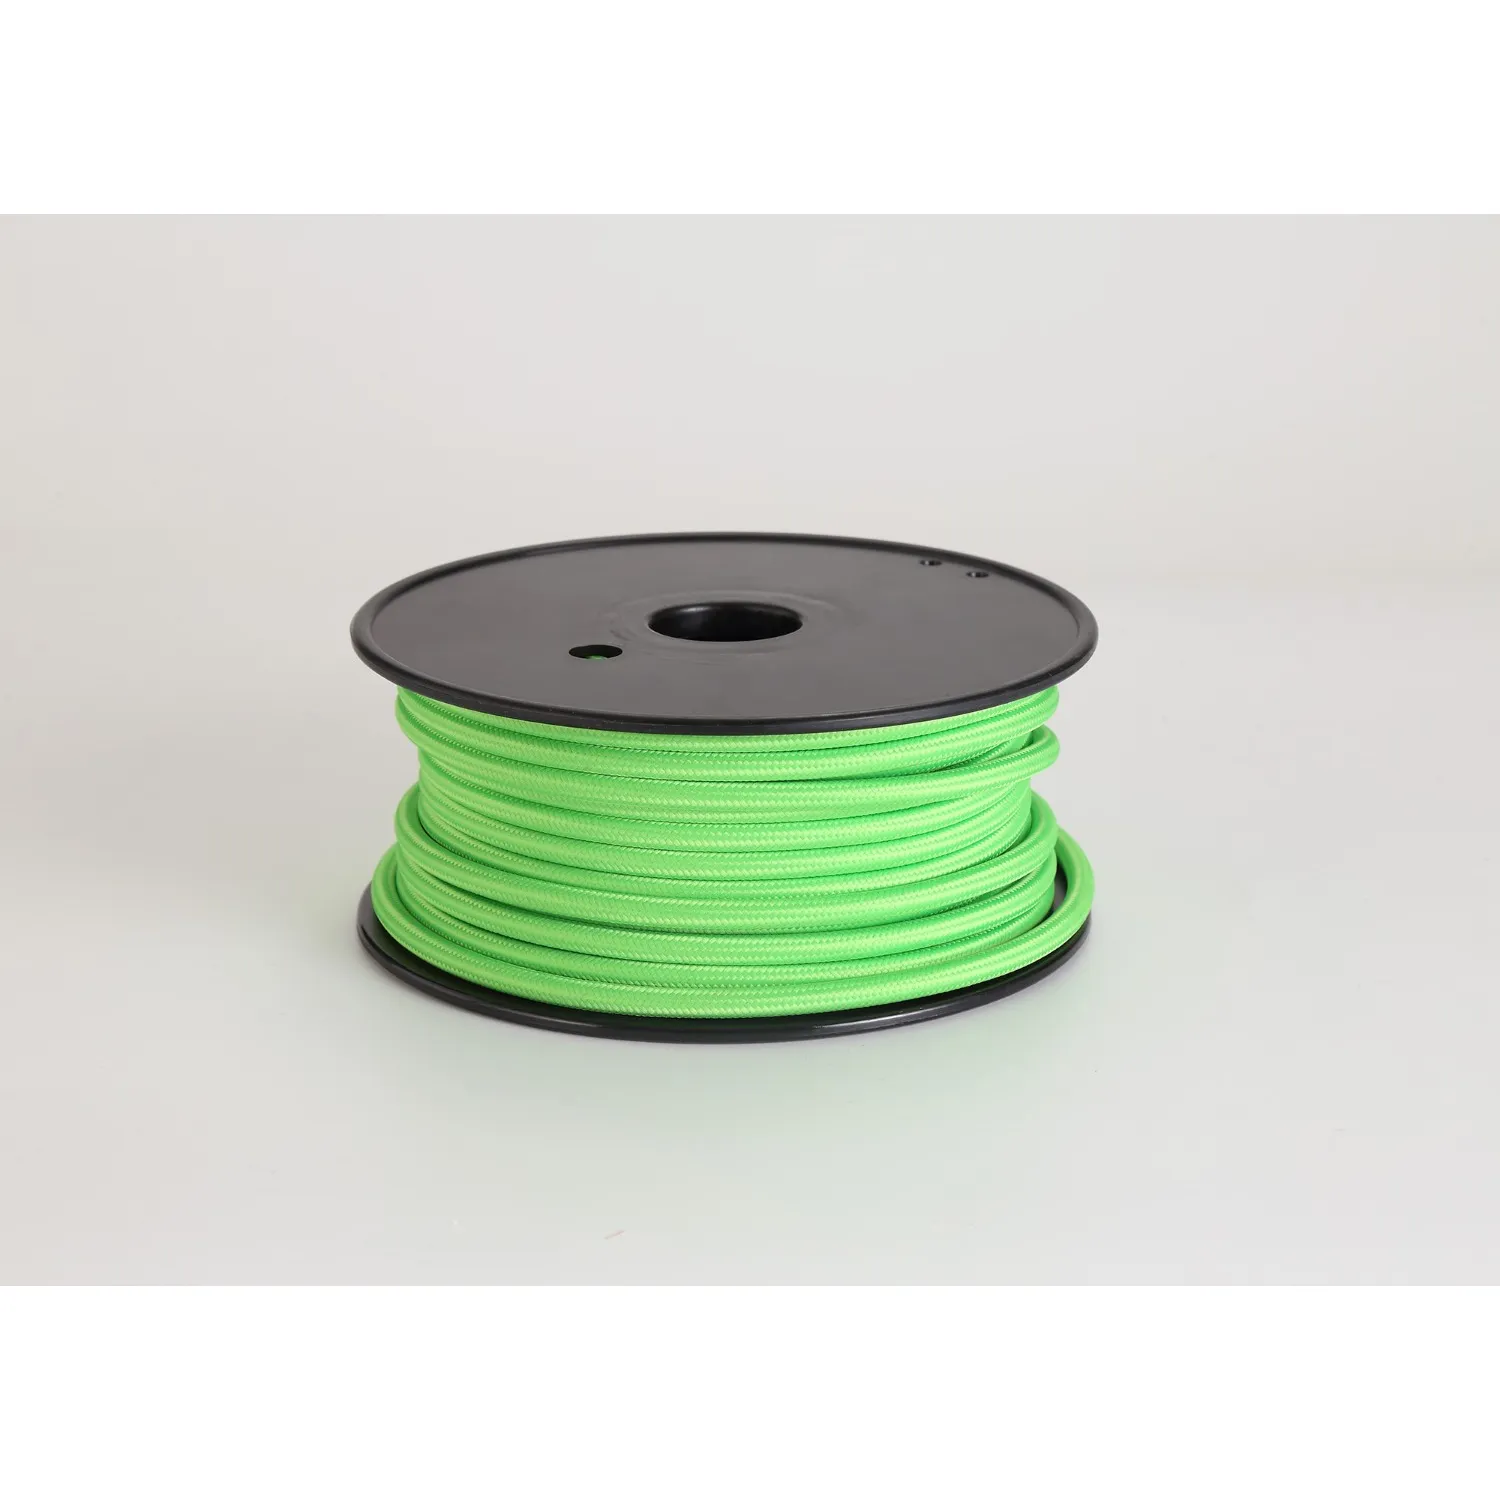 Knightsbridge 25m Roll Lime Green Braided 2 Core 0.75mm Cable VDE Approved